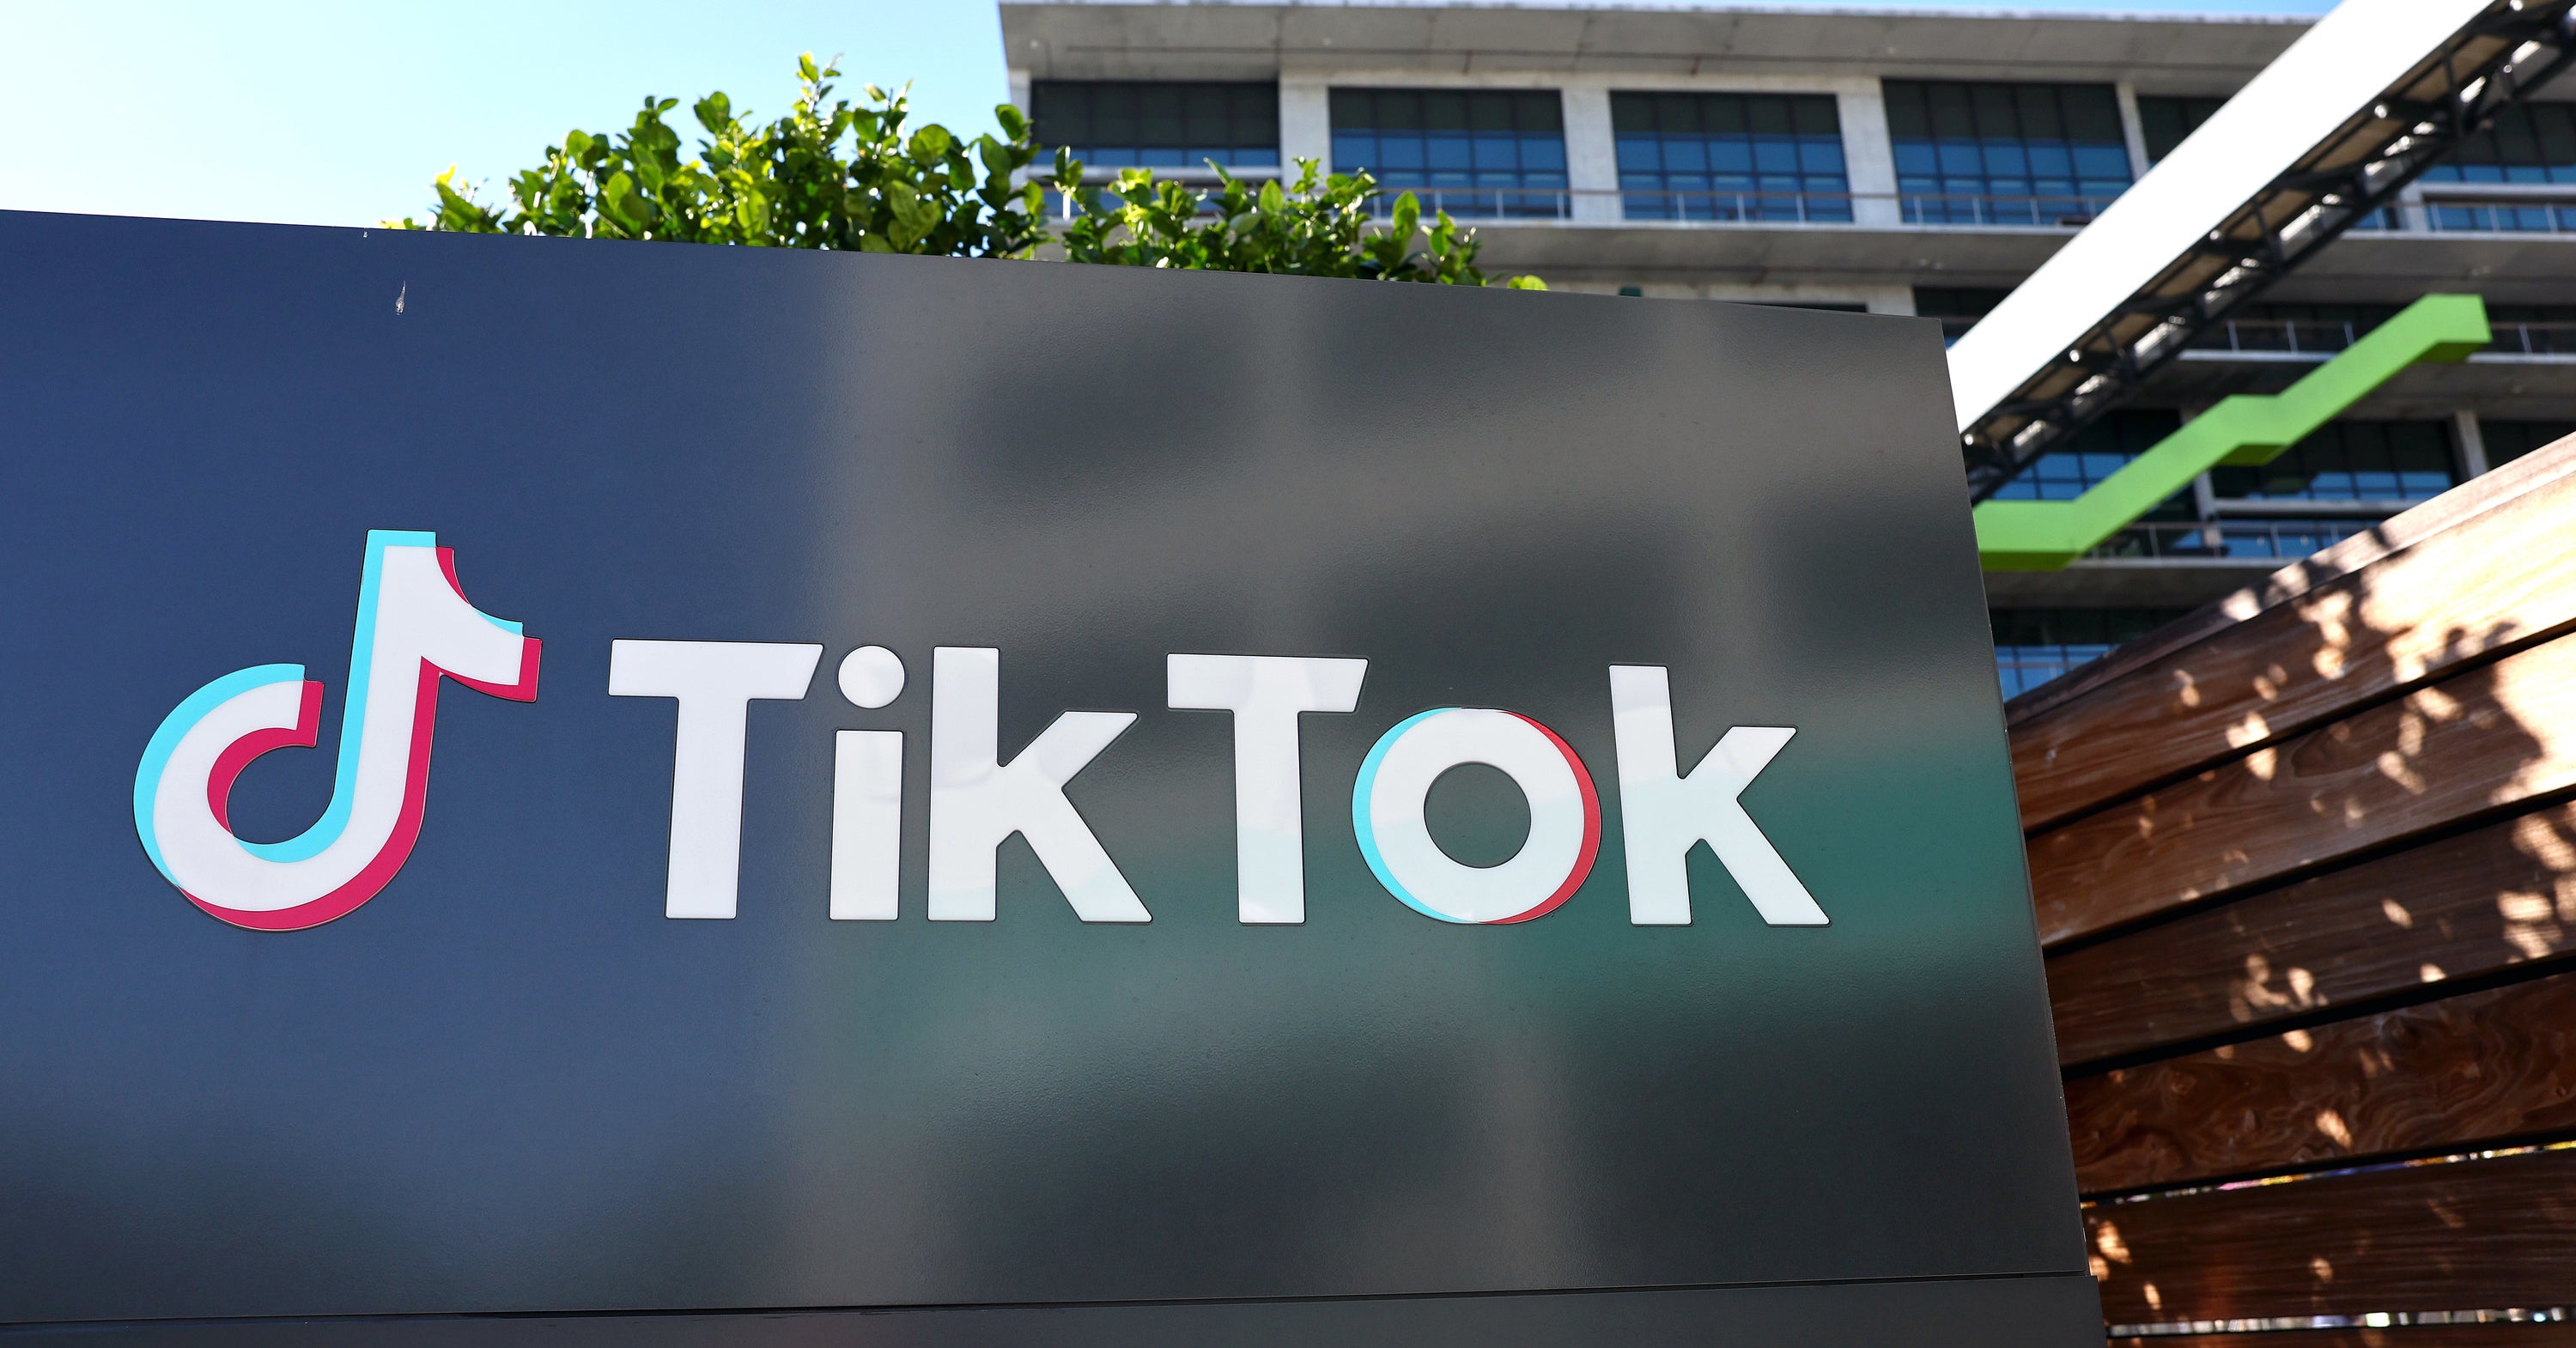 <div>TikTok Owner ByteDance Said Employees Improperly Obtained Journalists’ User Data</div>” title=”<div>TikTok Owner ByteDance Said Employees Improperly Obtained Journalists’ User Data</div>” srcset=”https://thelivingvision.com/wp-content/uploads/2022/12/sub-buzz-5533-1671742262-4.jpg 1250w, https://thelivingvision.com/wp-content/uploads/2022/12/sub-buzz-5533-1671742262-4-768×402.jpg 768w” sizes=”(max-width: 1250px) 100vw, 1250px” title=”” /><div>
<div><img decoding=